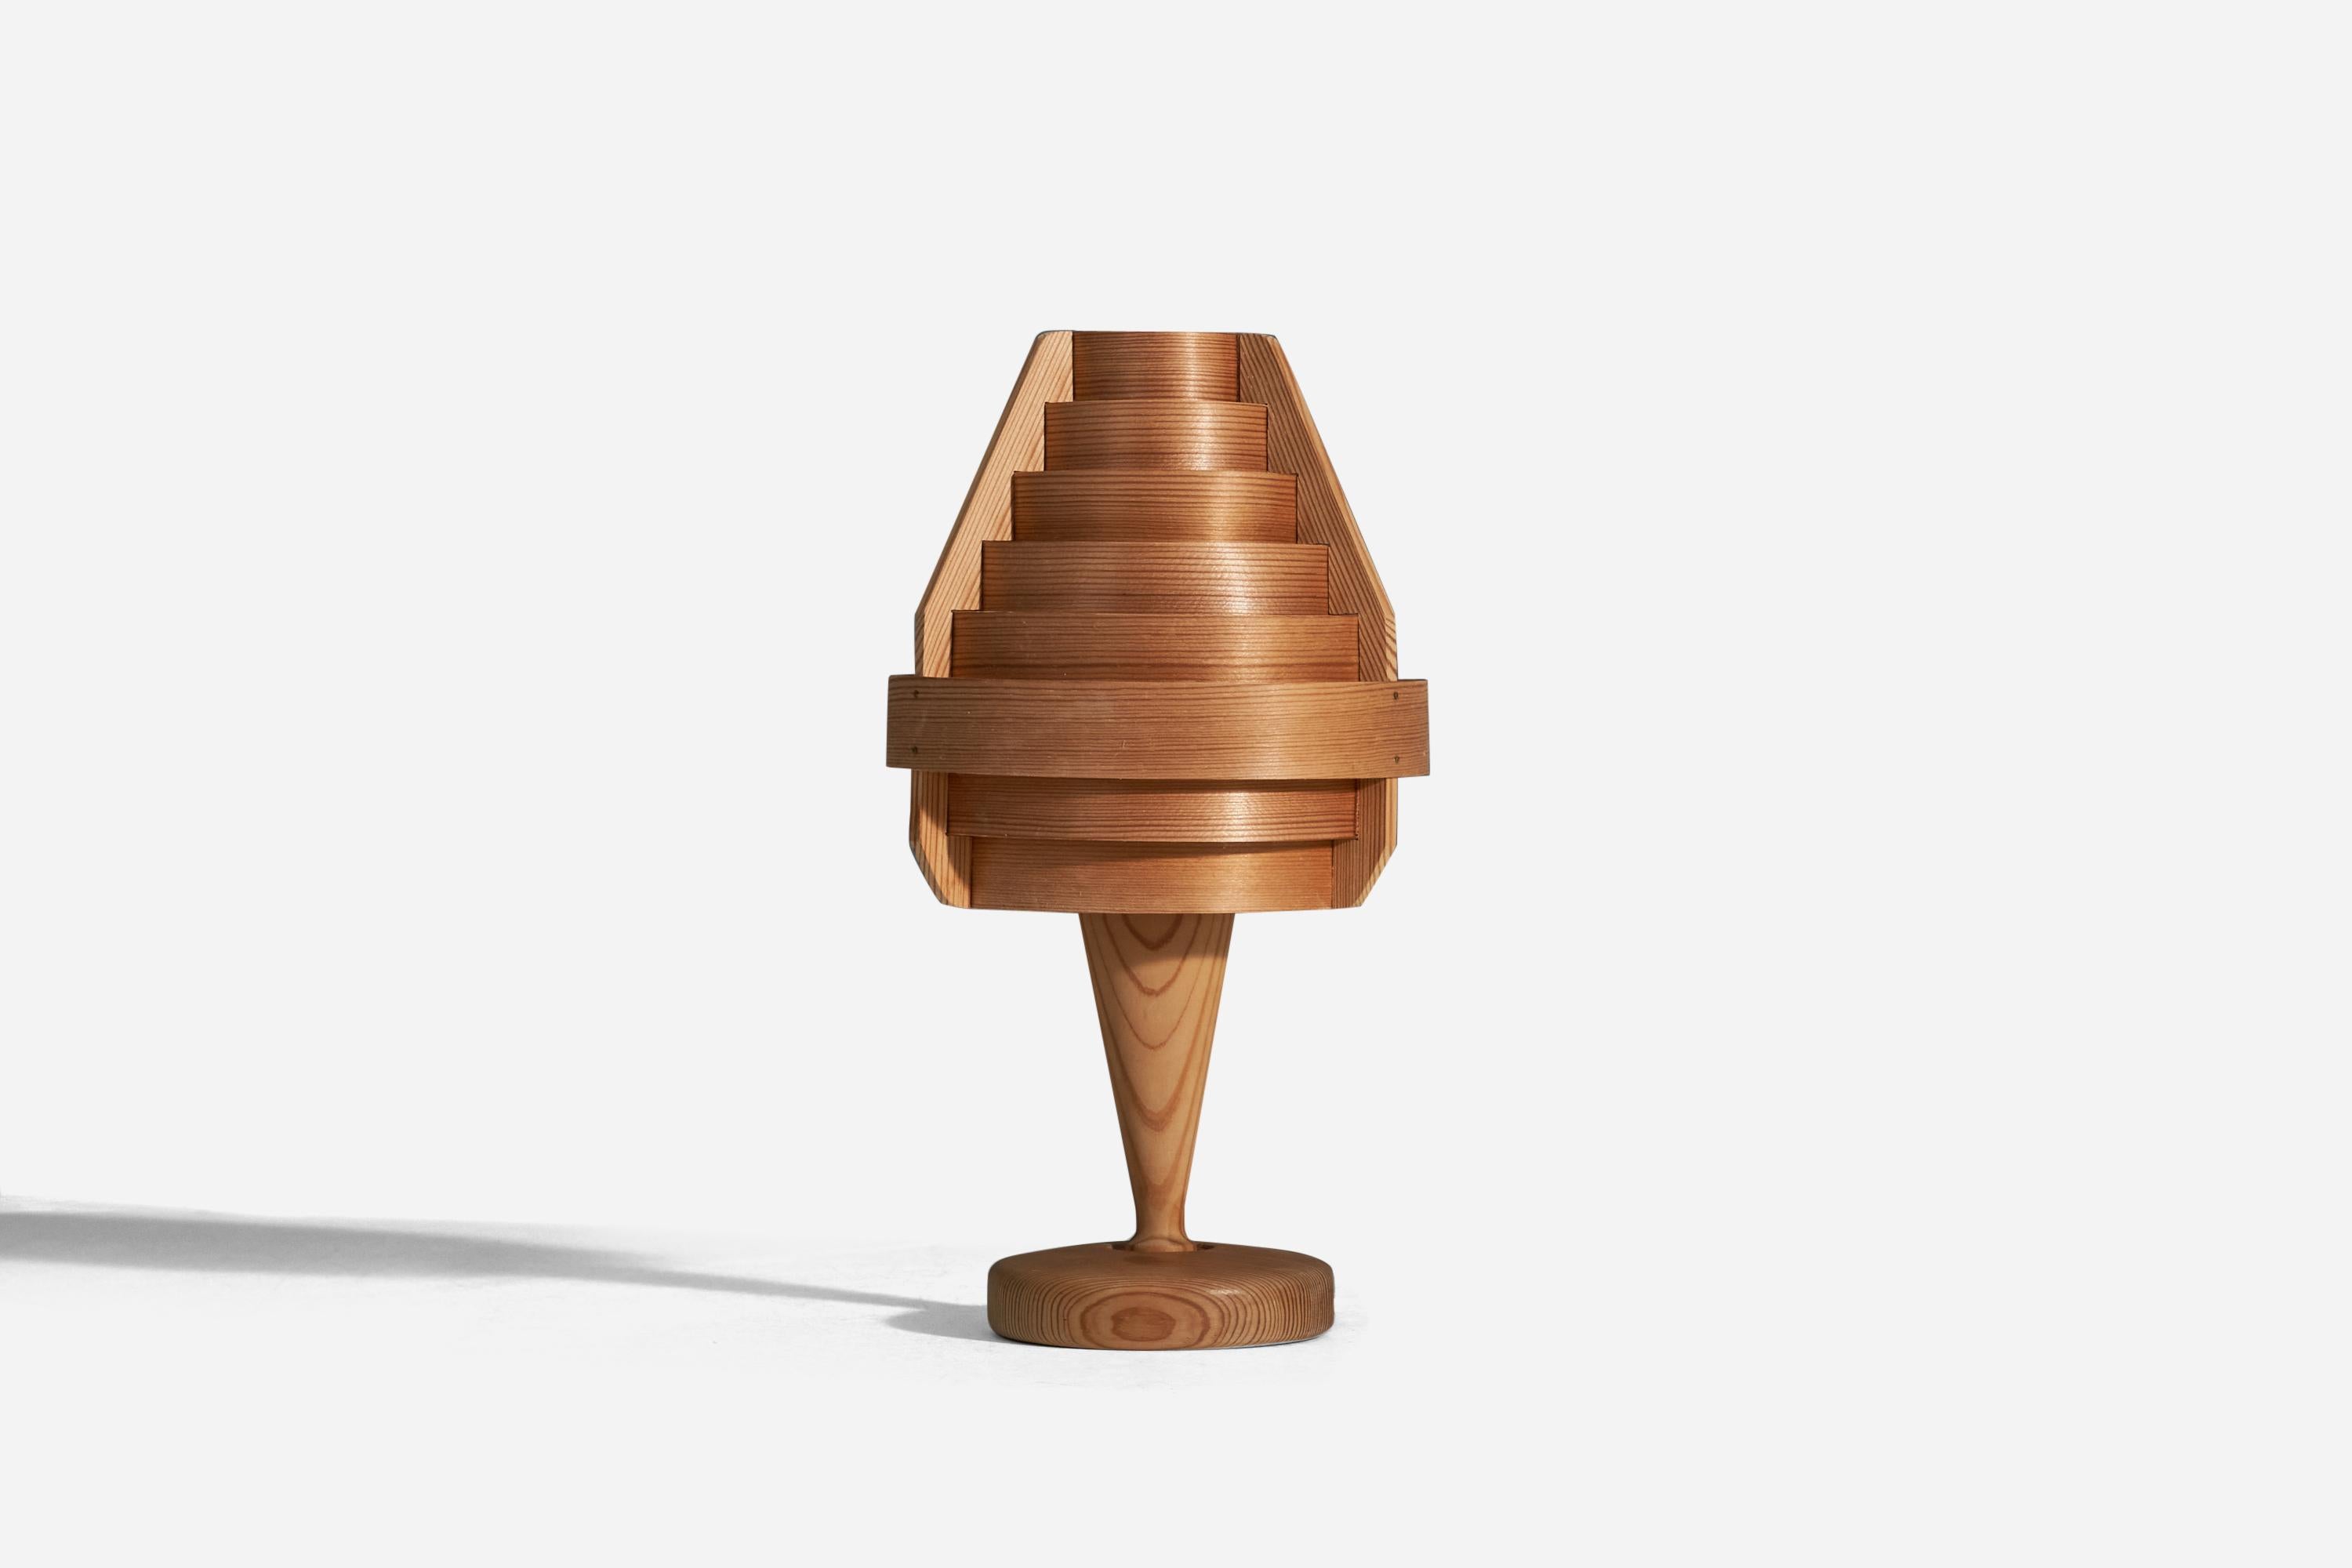 A pine and moulded pine veneer table lamp designed and produced by Hans-Agne Jakobsson, Sweden, 1970s.

Socket takes E-14 bulb.

There is no maximum wattage stated on the fixture.